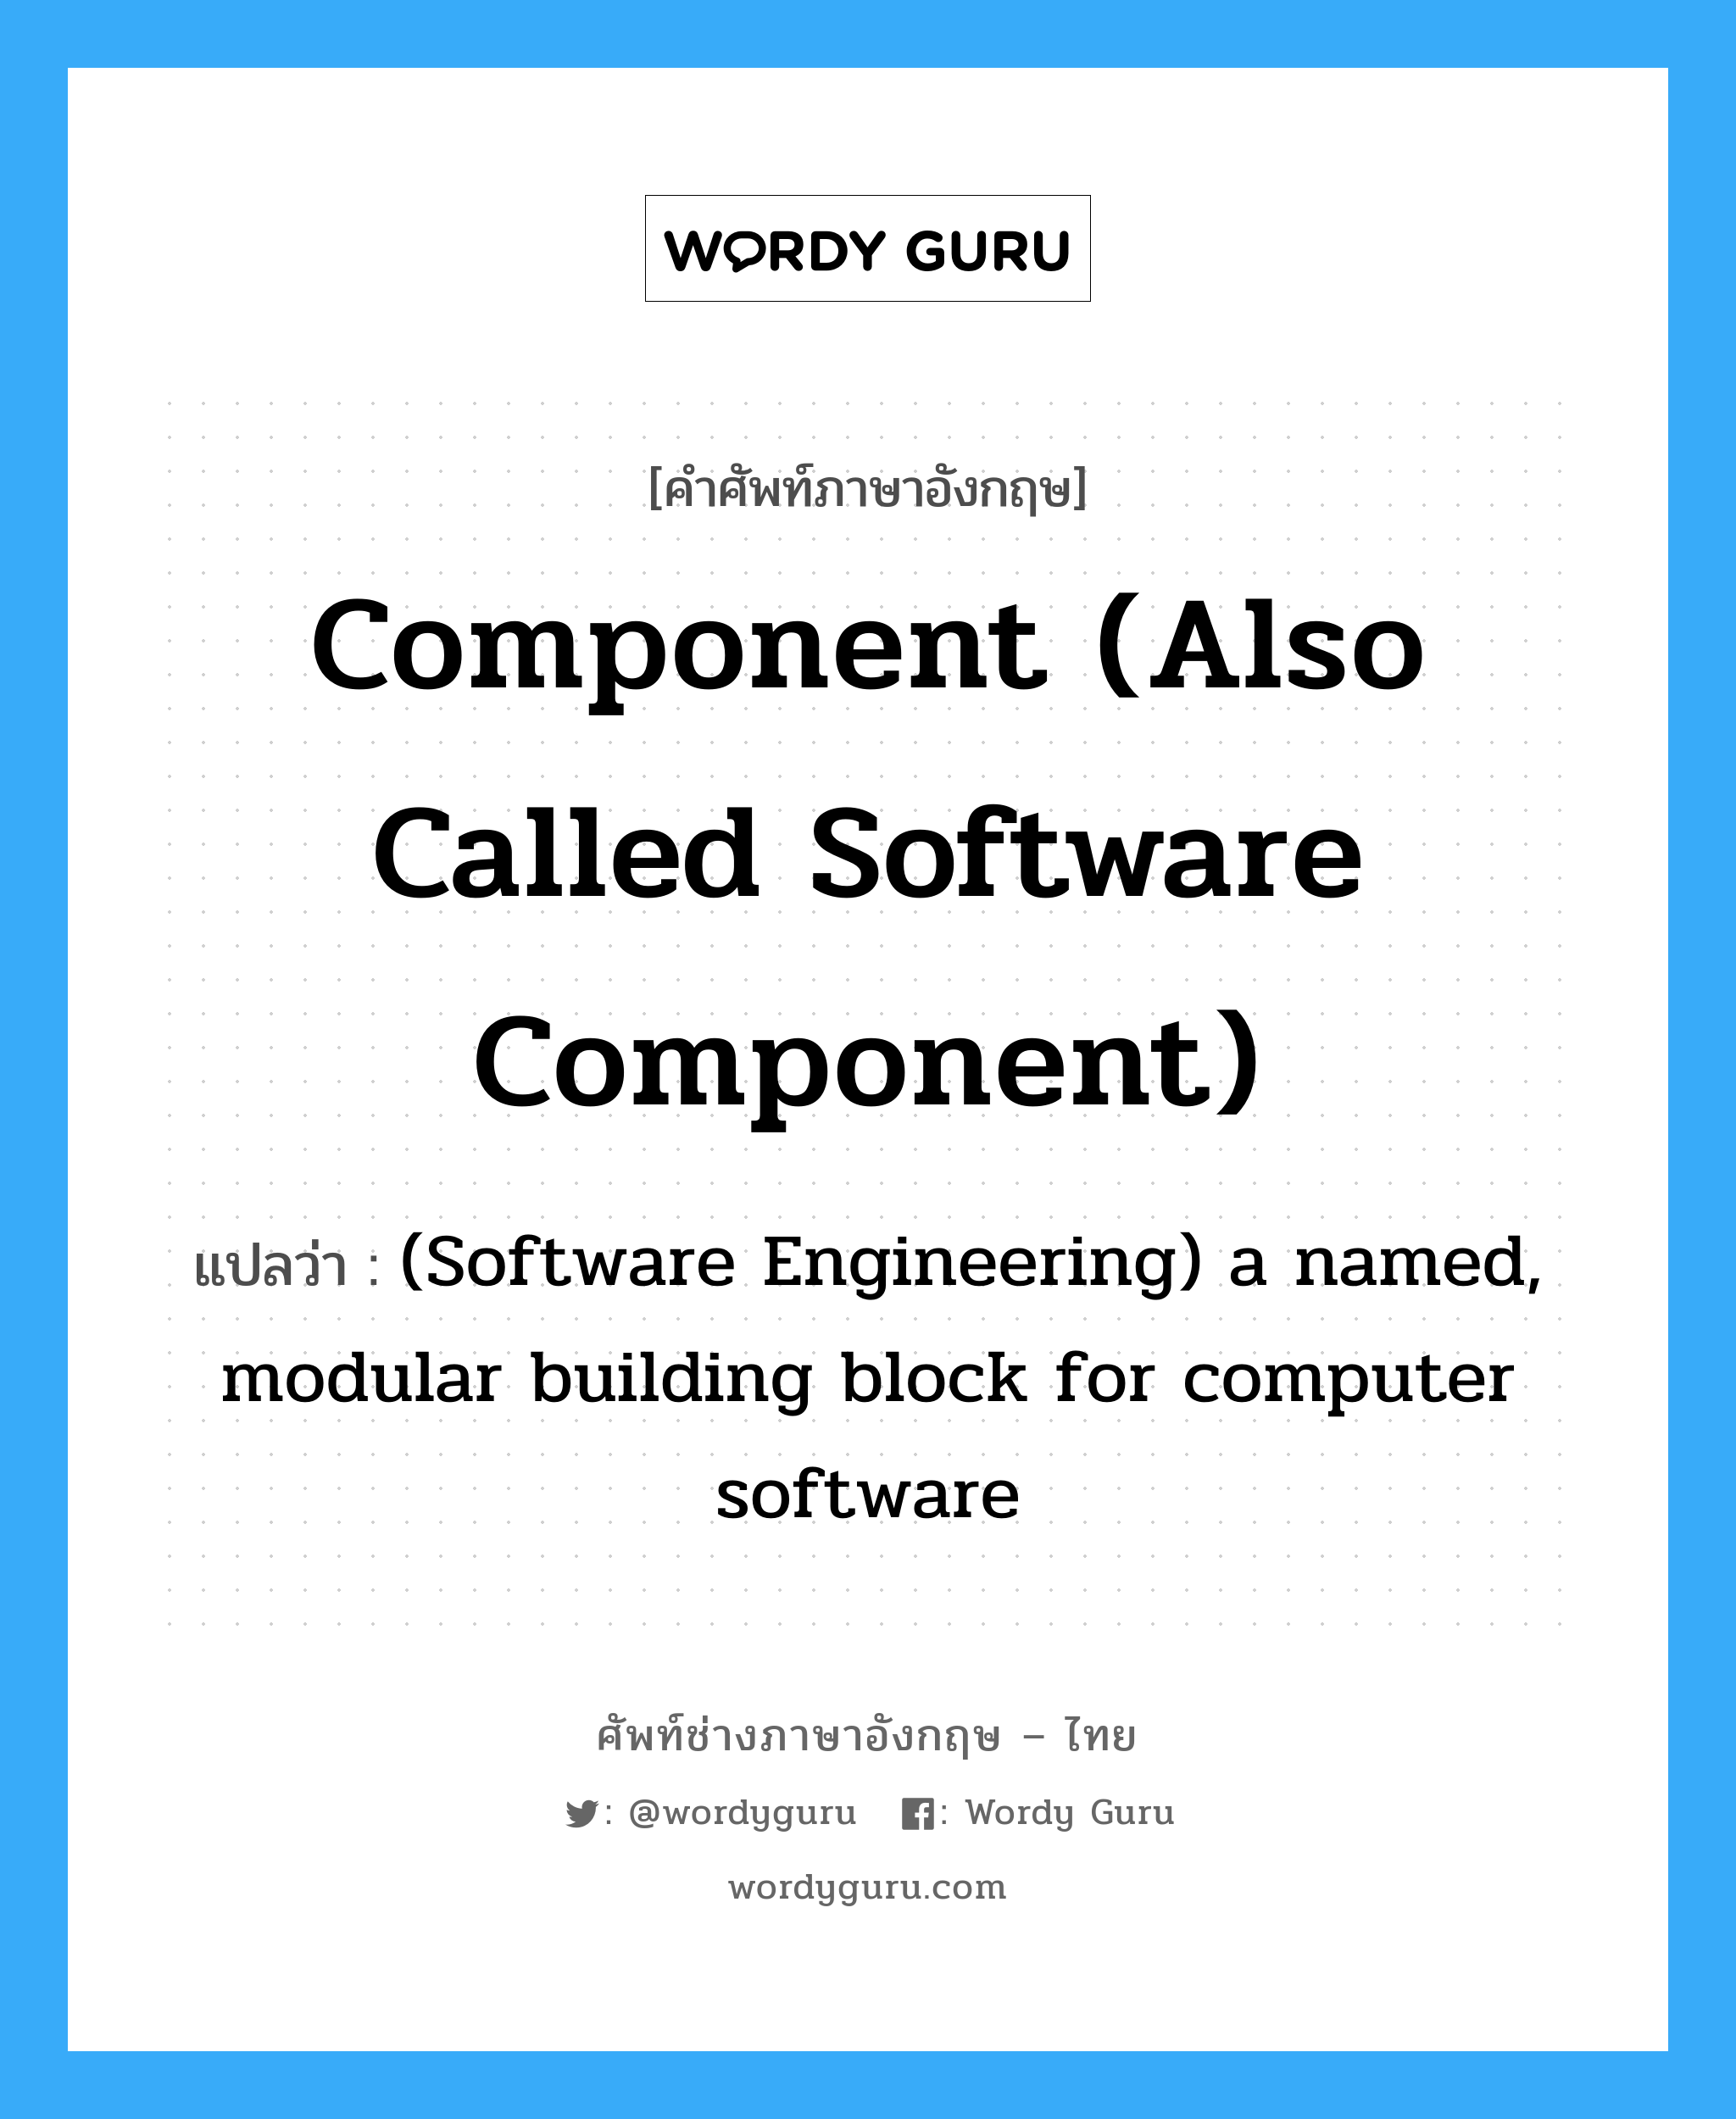 (Software Engineering) a named, modular building block for computer software ภาษาอังกฤษ?, คำศัพท์ช่างภาษาอังกฤษ - ไทย (Software Engineering) a named, modular building block for computer software คำศัพท์ภาษาอังกฤษ (Software Engineering) a named, modular building block for computer software แปลว่า Component (also called Software component)